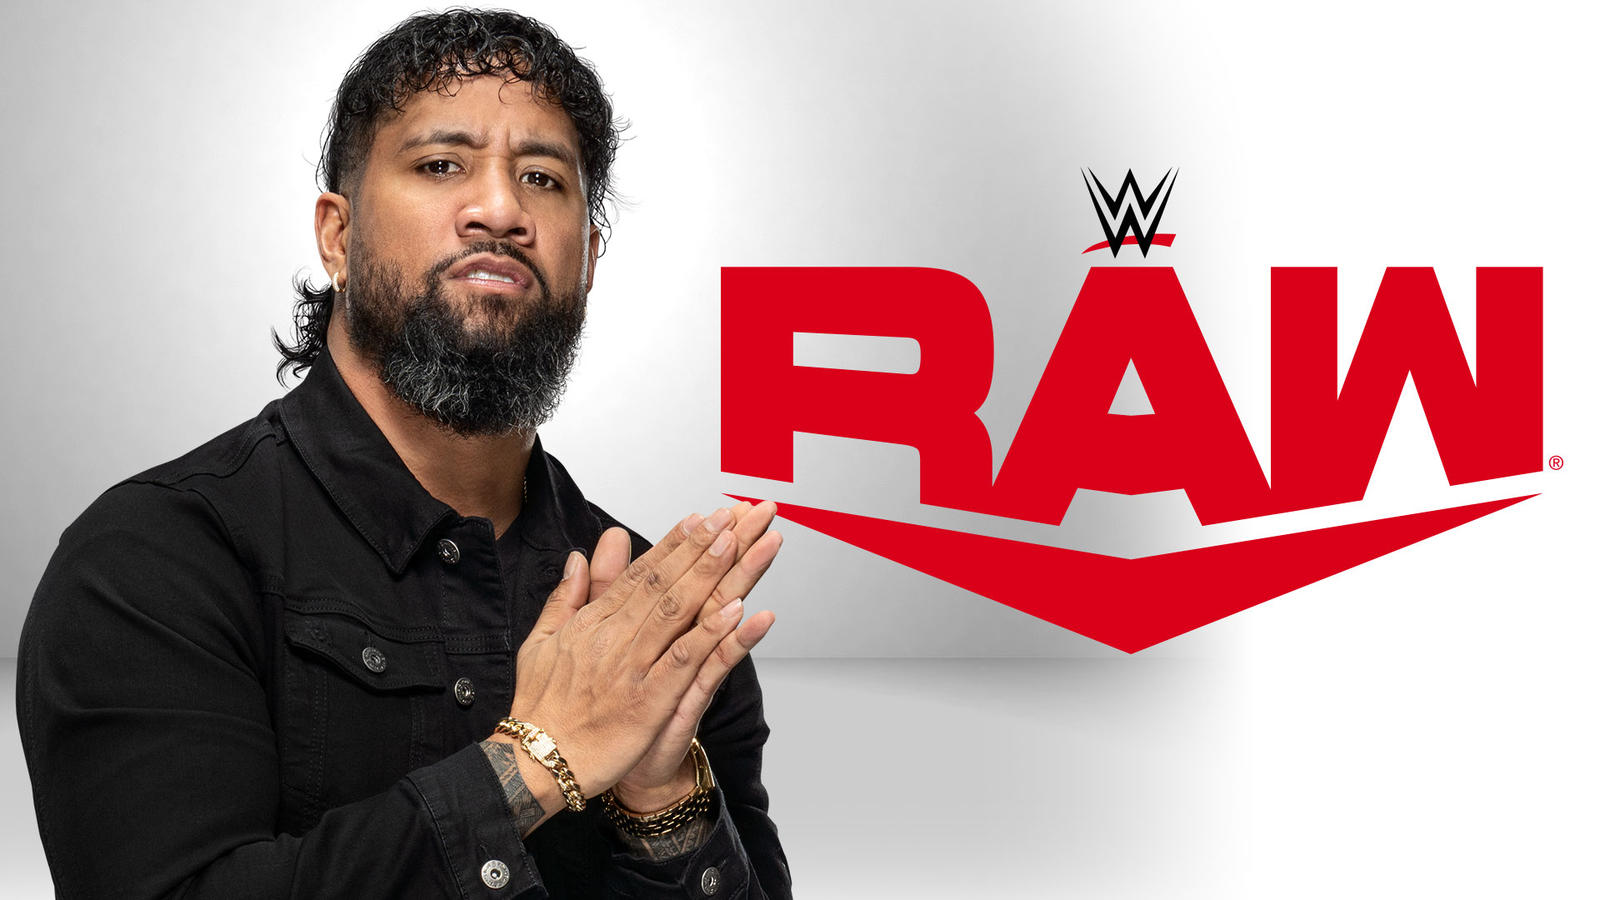 WWE Monday Night RAW graphic featuring Jey Uso.